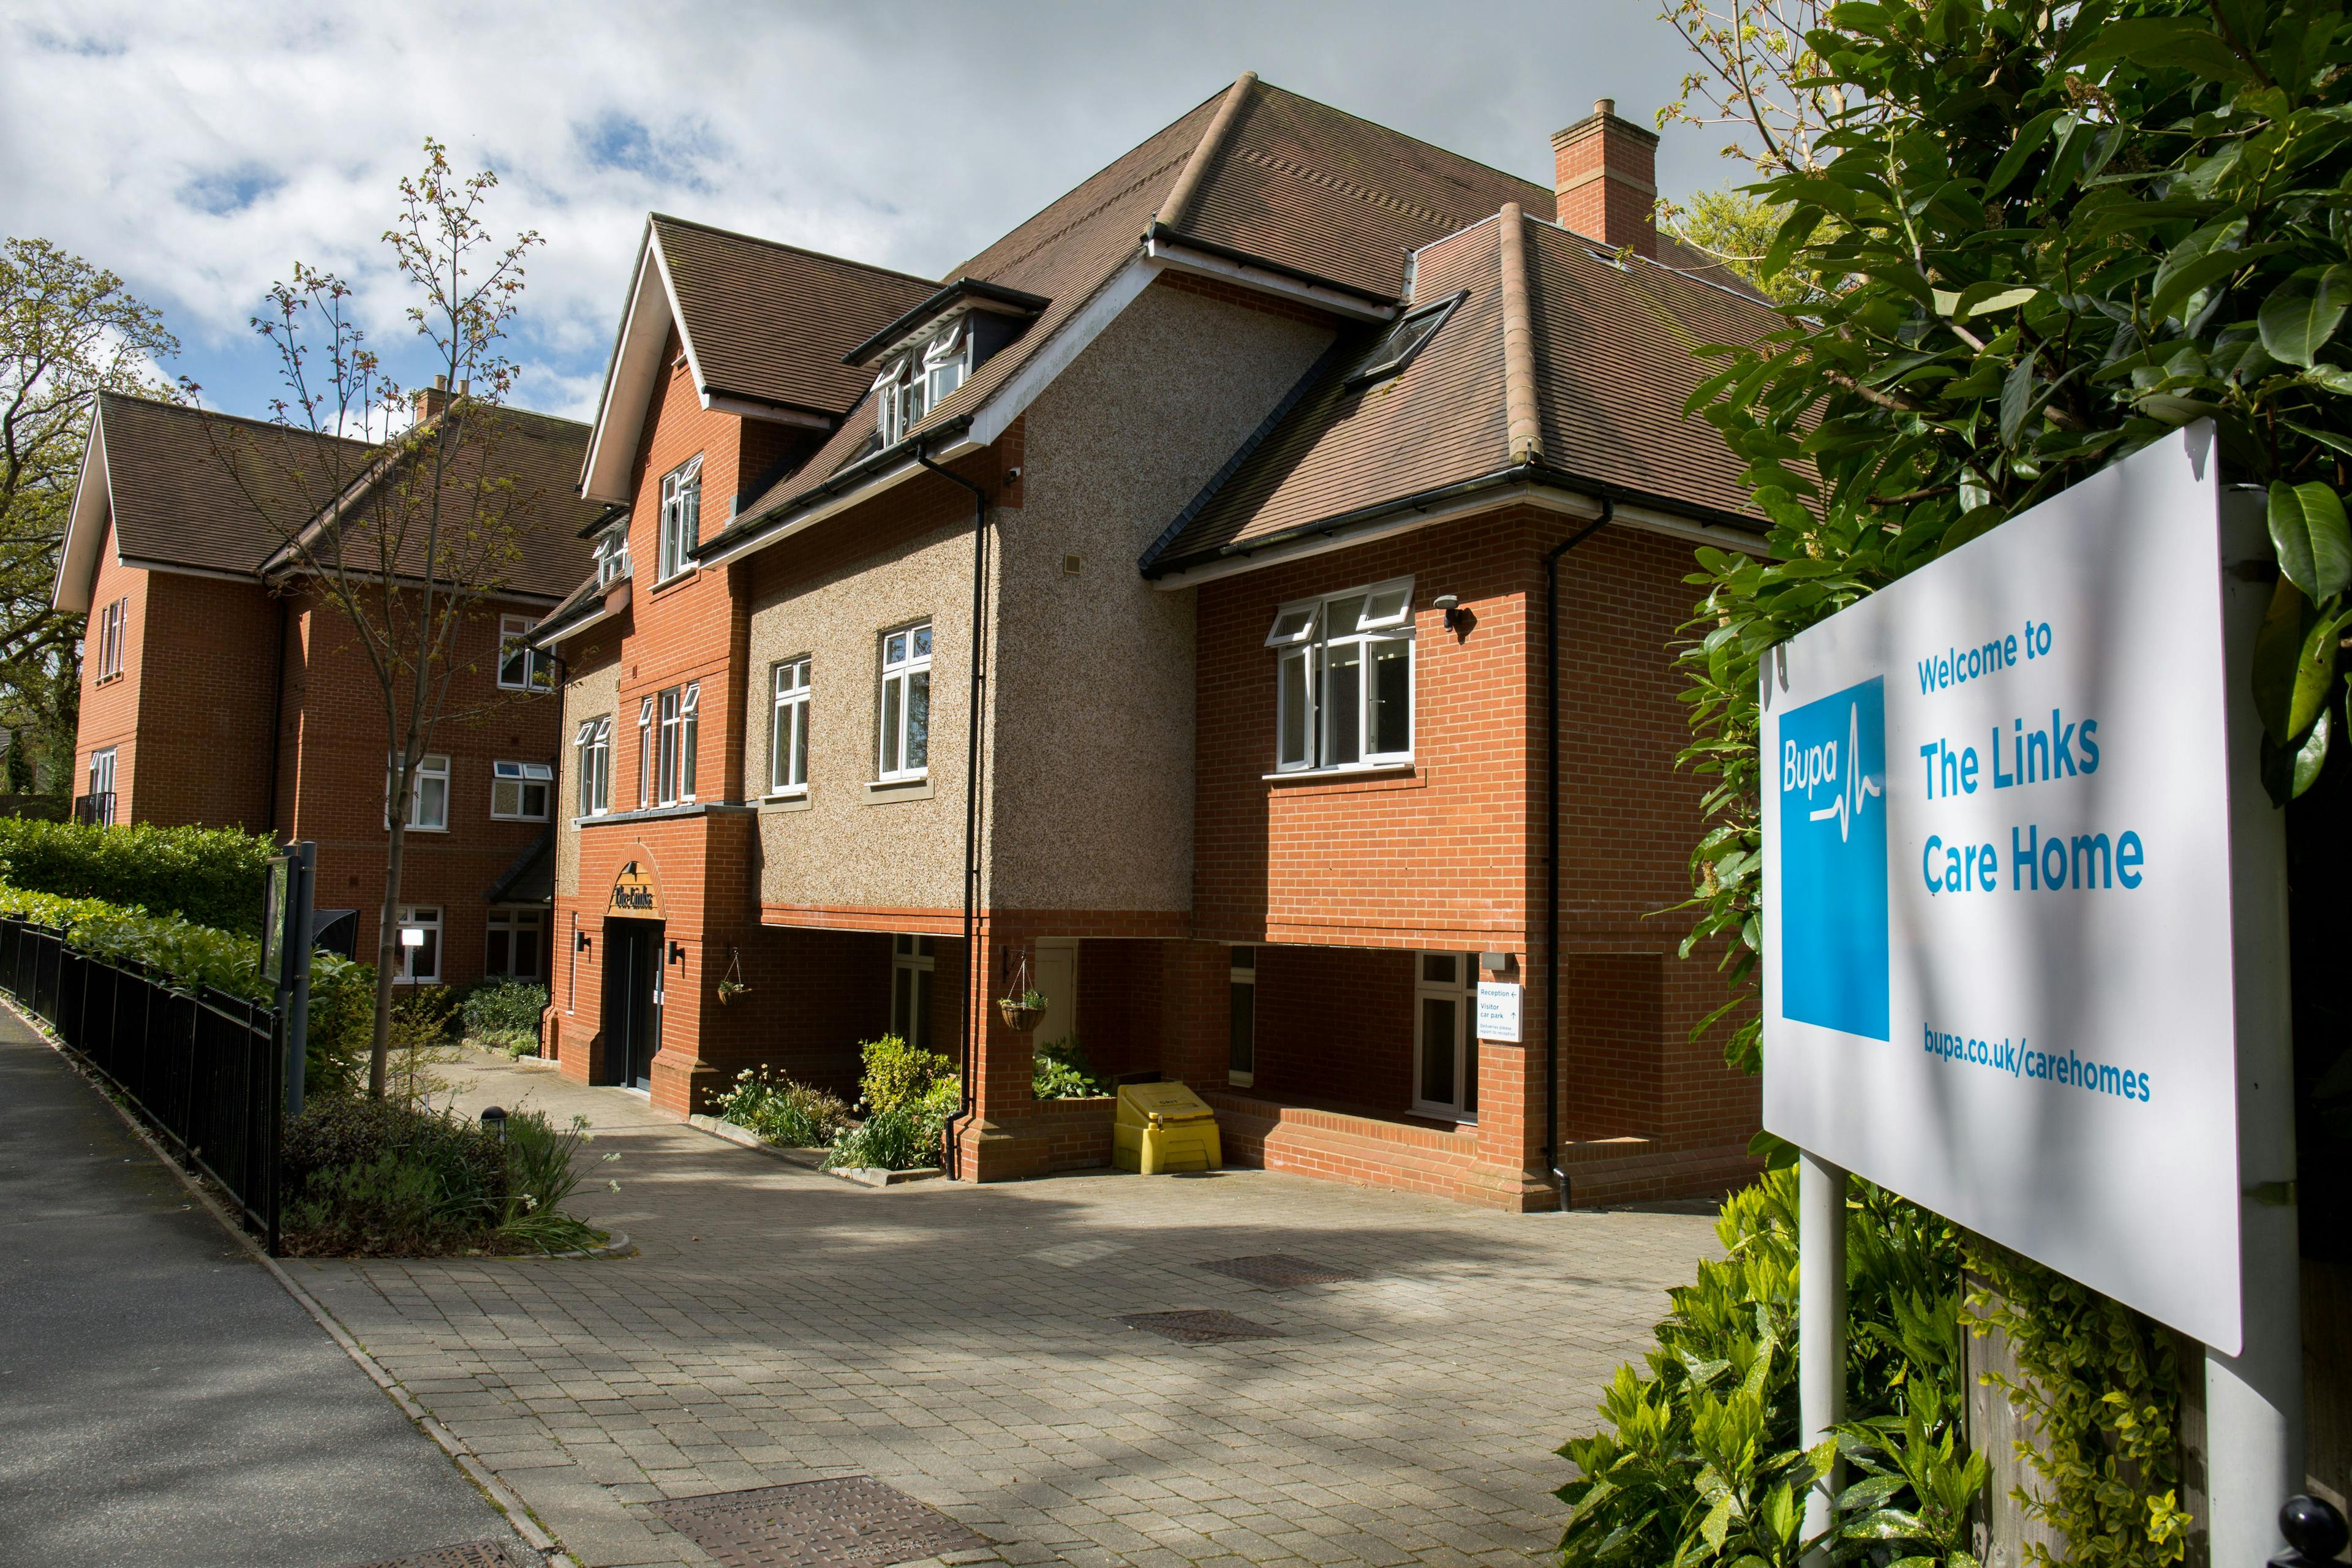 The Links care home